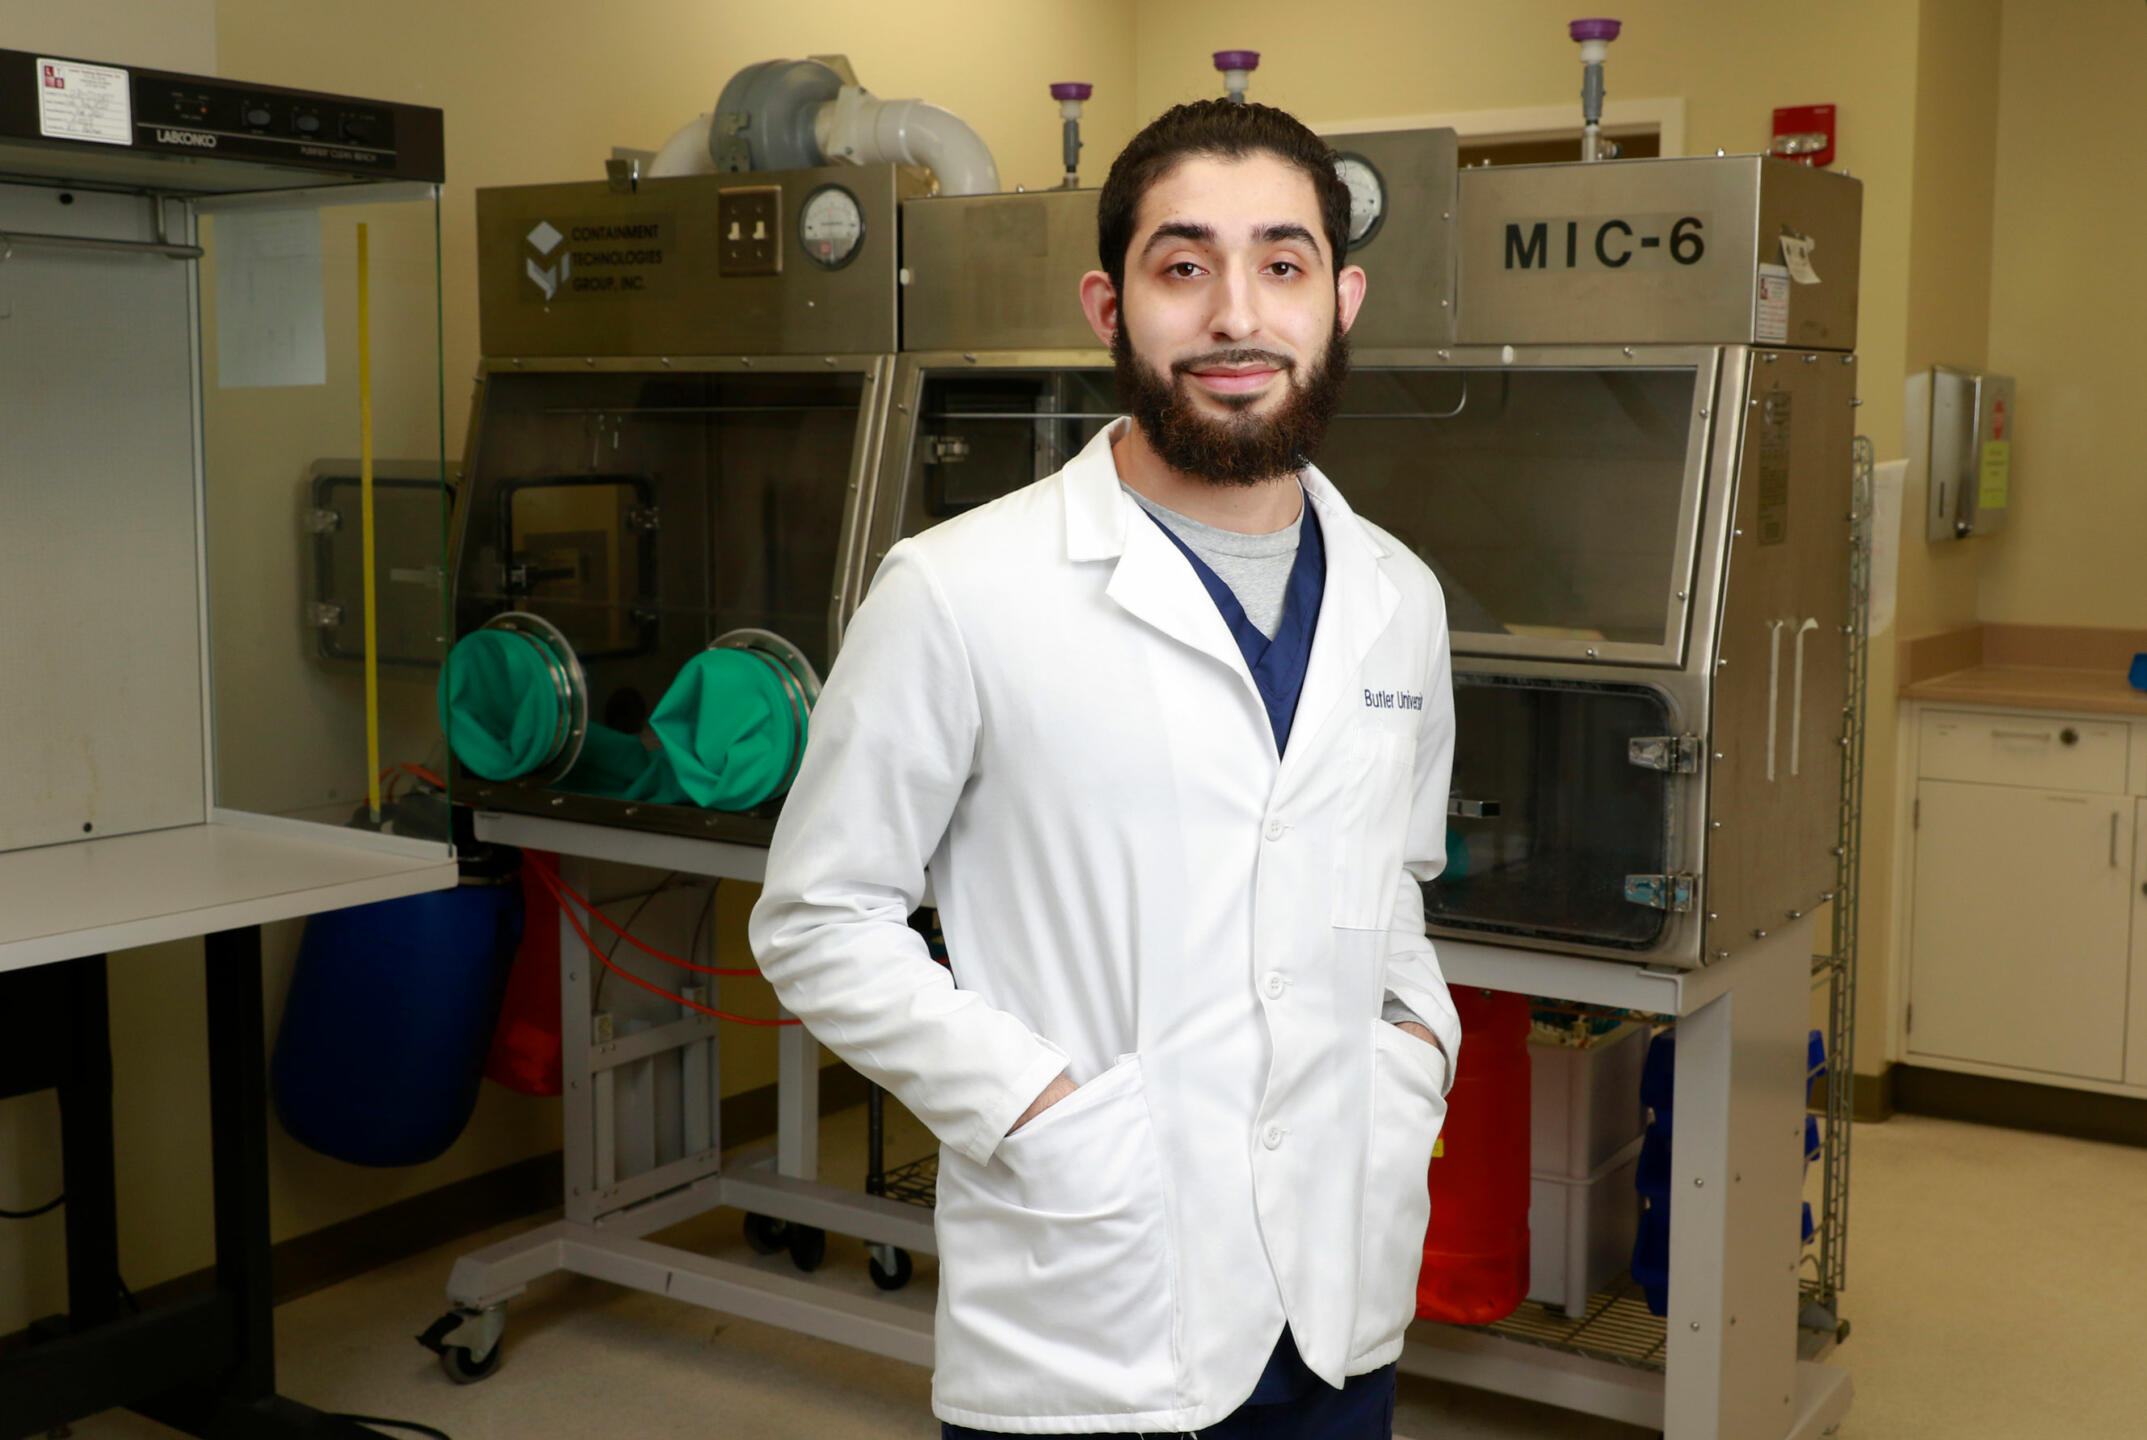 Student in white lab coat poses in lab